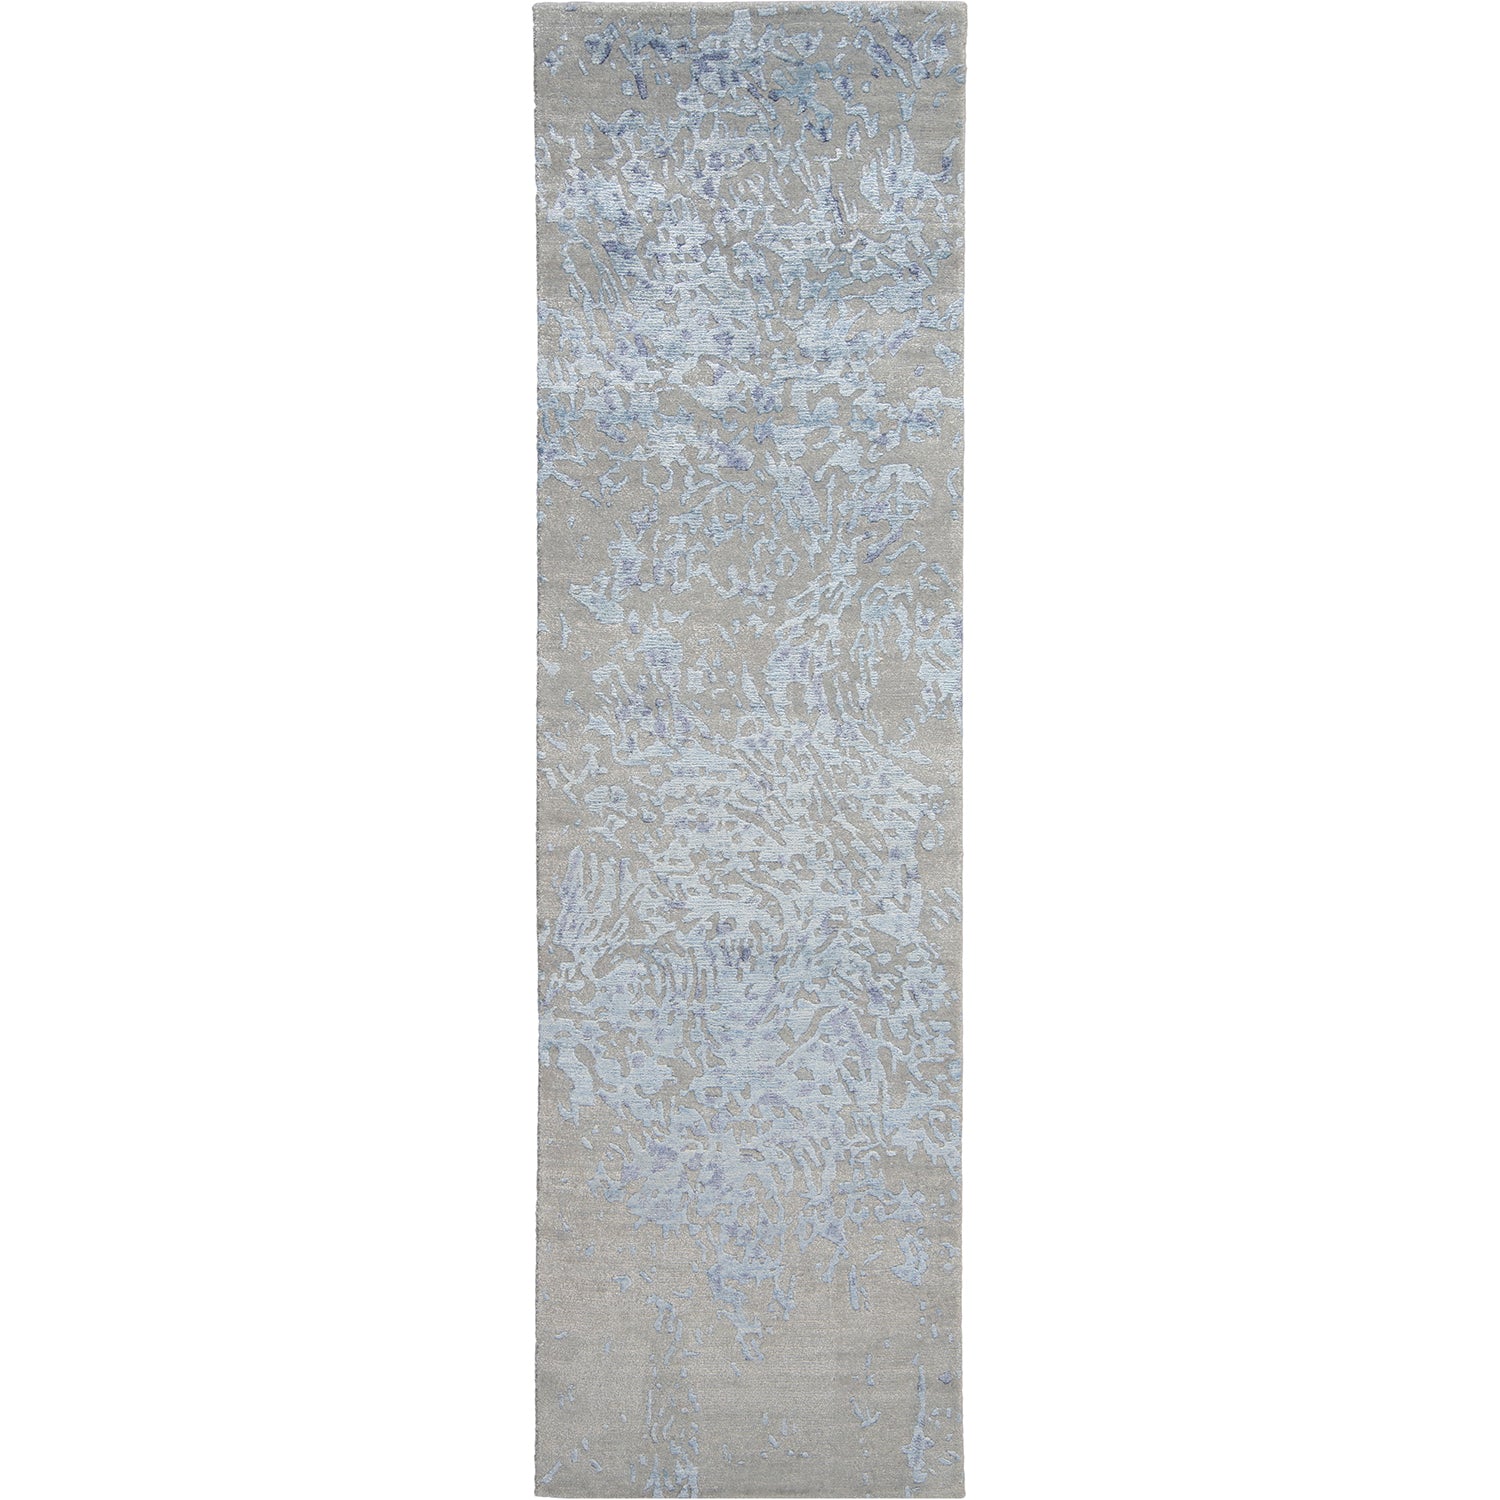 Frosted coral-inspired rug with modern design, perfect for narrow spaces.